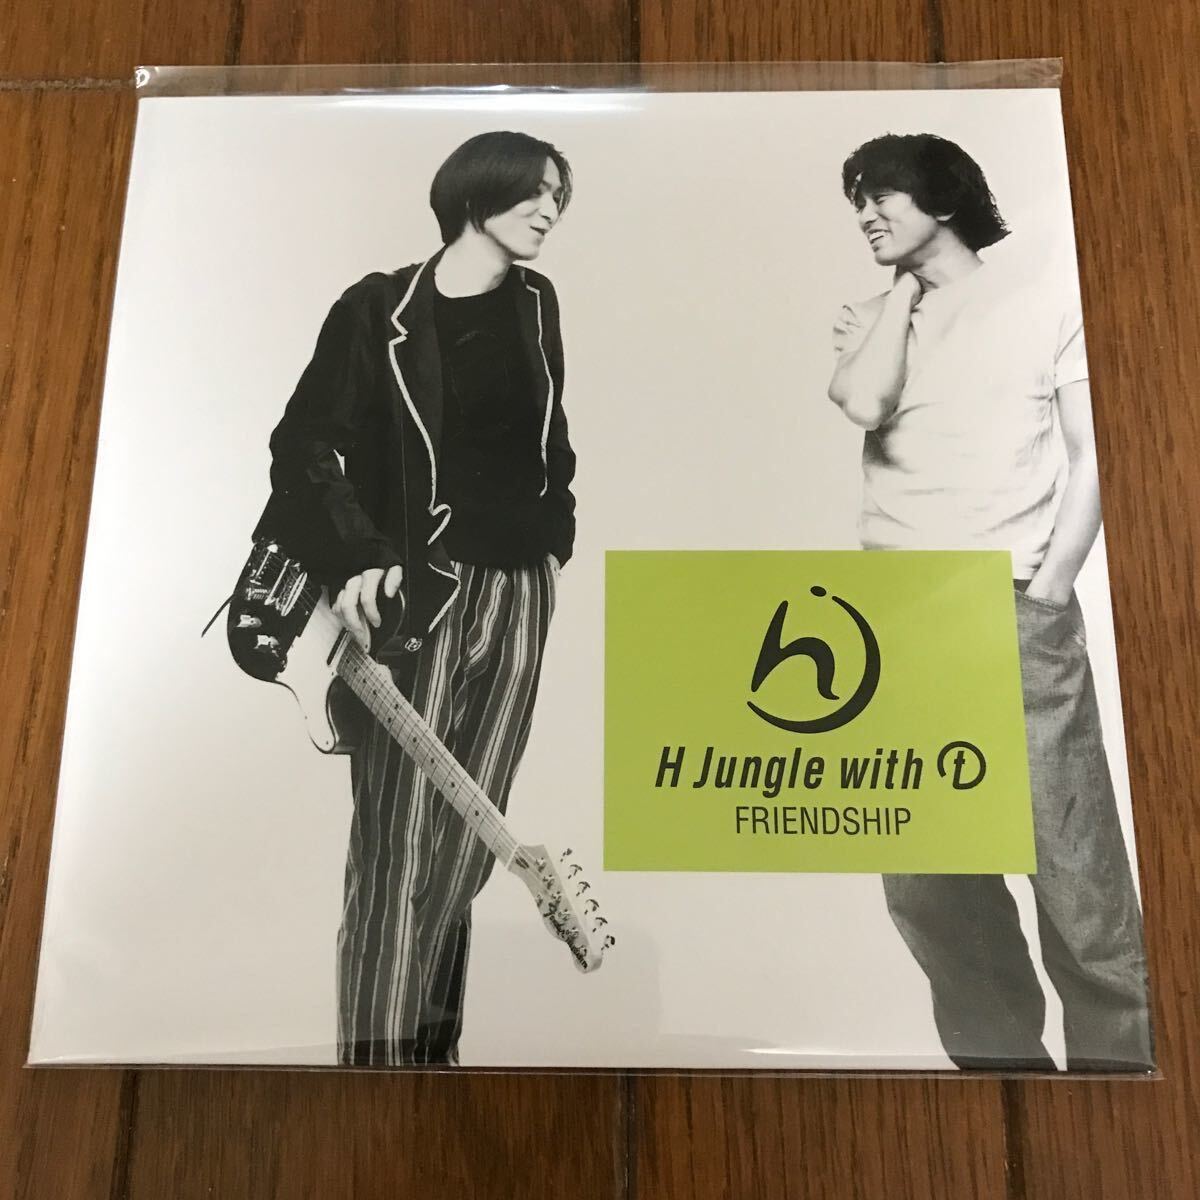 H Jungle With t レコード アナログ盤 3枚セット WOW WAR TONIGHT / GOING GOING HOME / FRIENDSHIP / 新品未開封の画像6